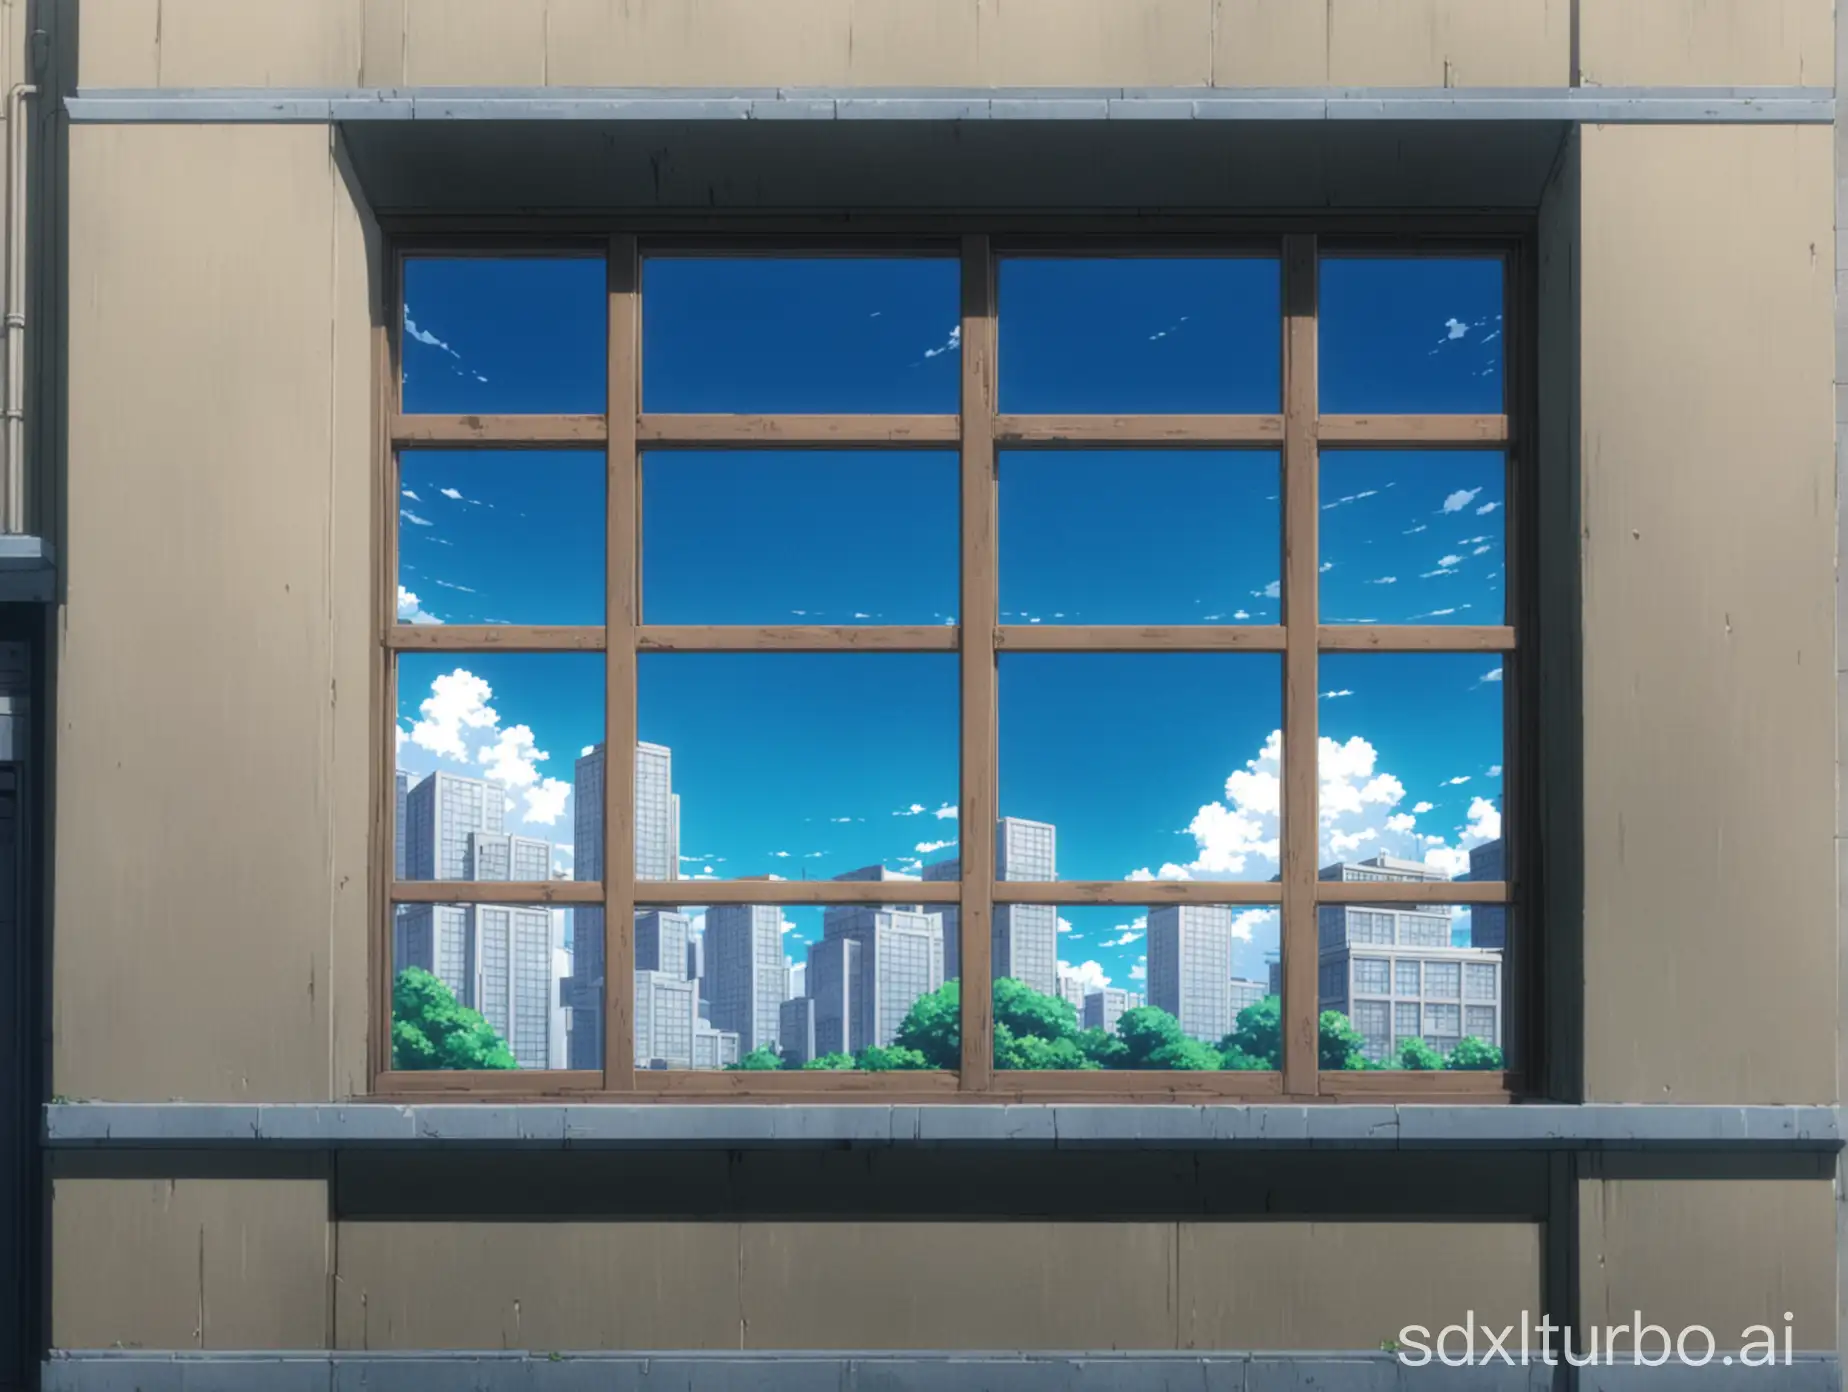 an anime background with building window seen from outside